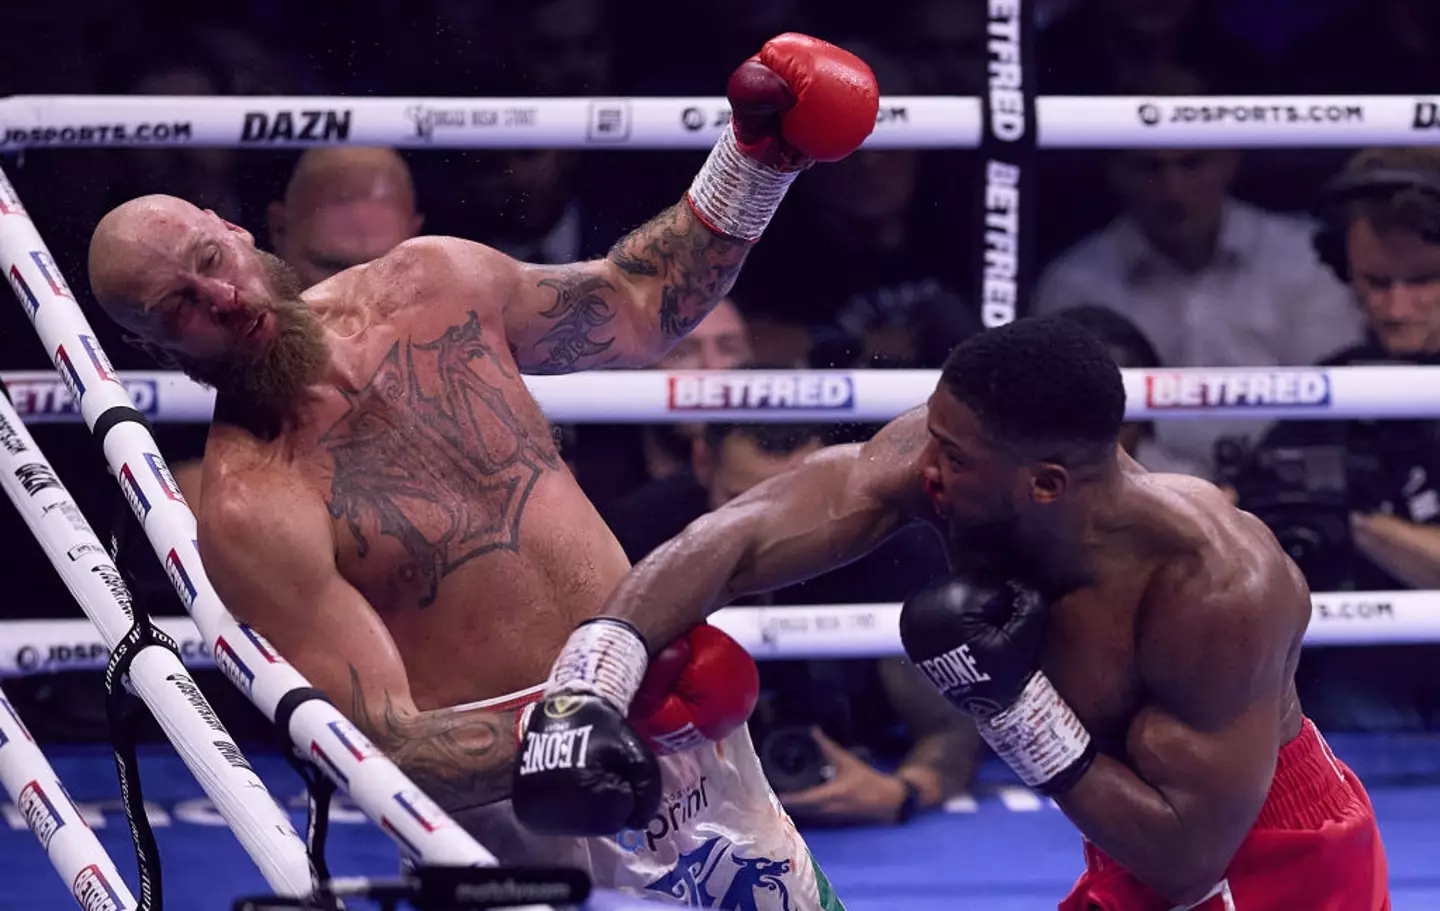 Joshua knocked out Robert Helenius in his most recent fight.